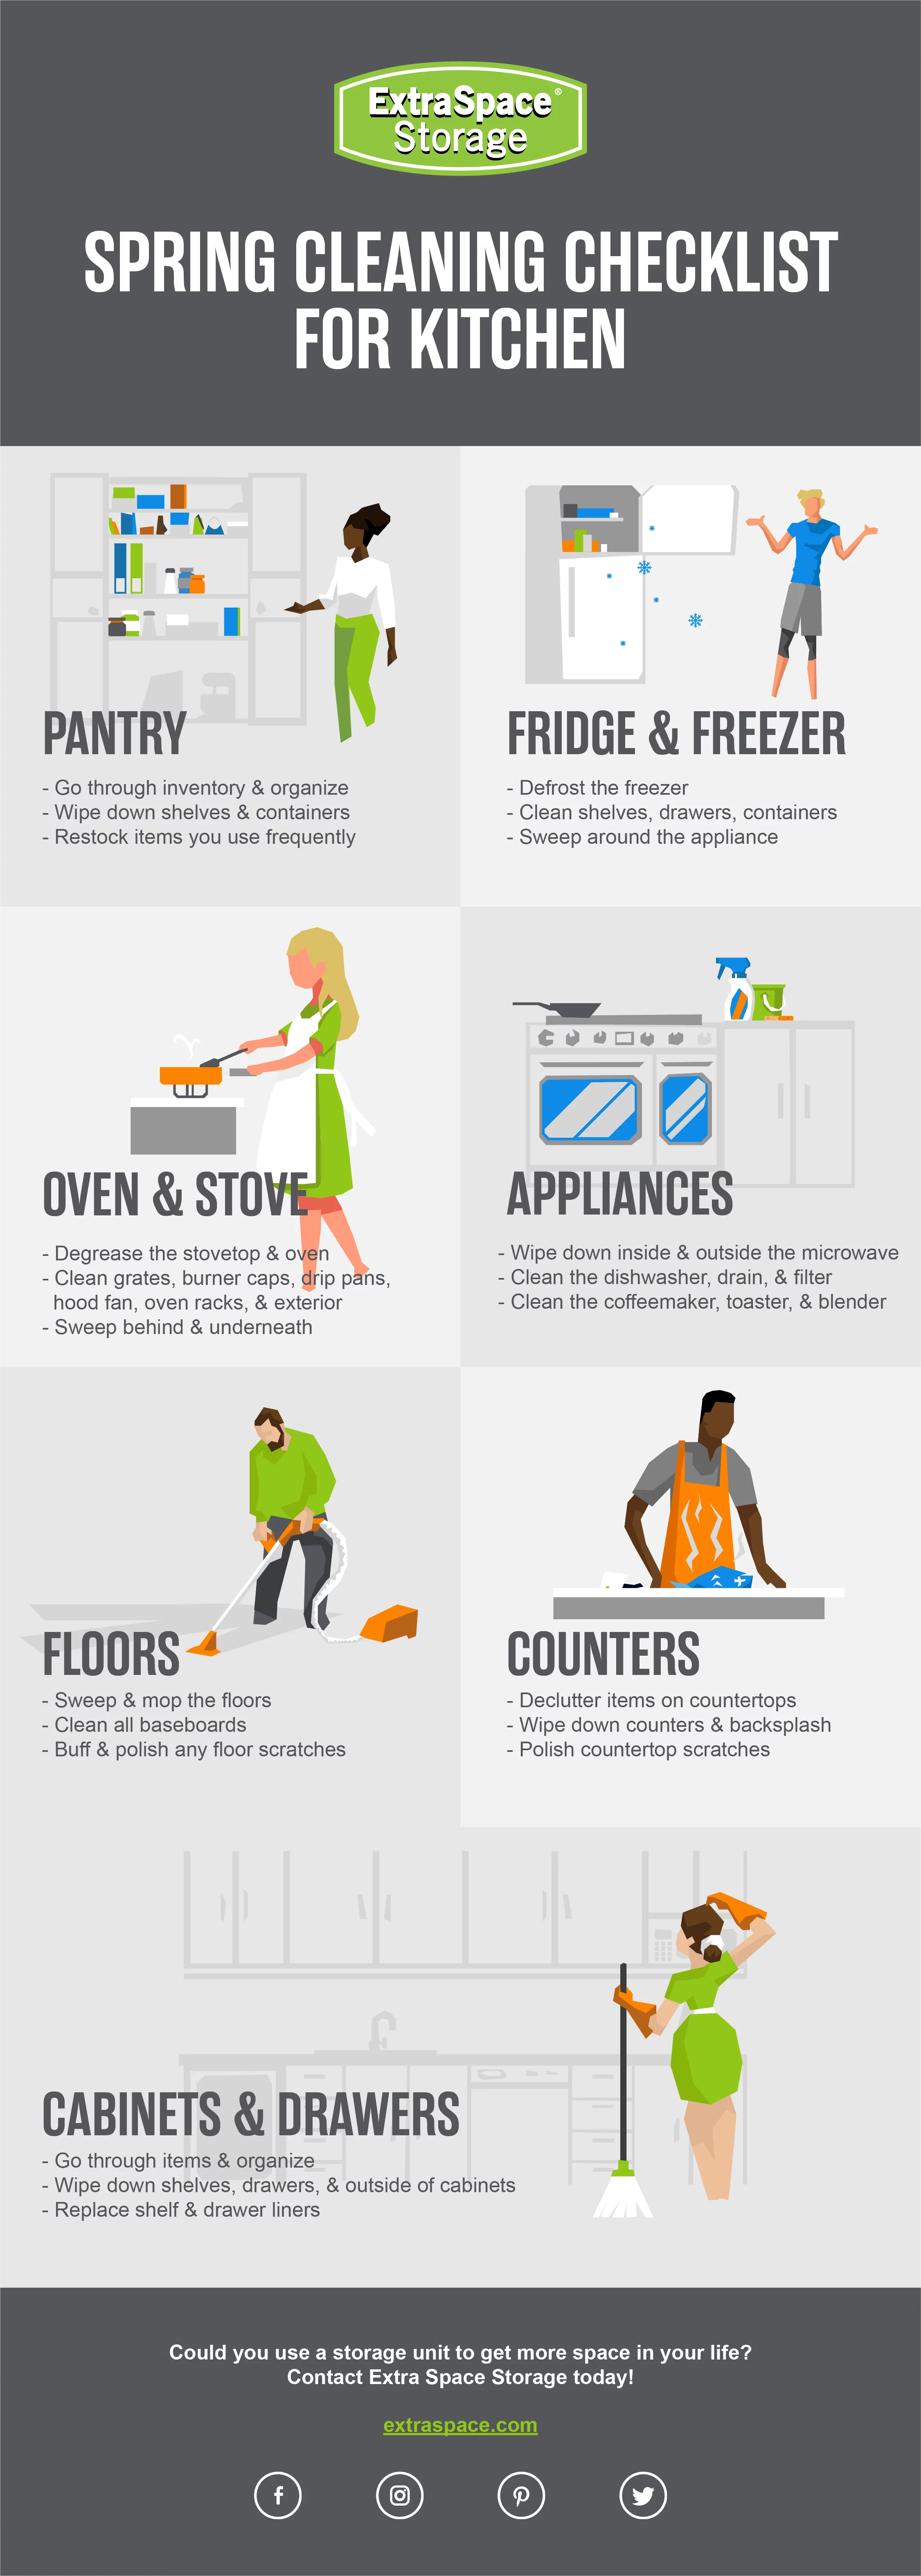 https://www.extraspace.com/blog/wp-content/uploads/2022/08/Spring-Cleaning-Checklist-for-Kitchen.png.webp